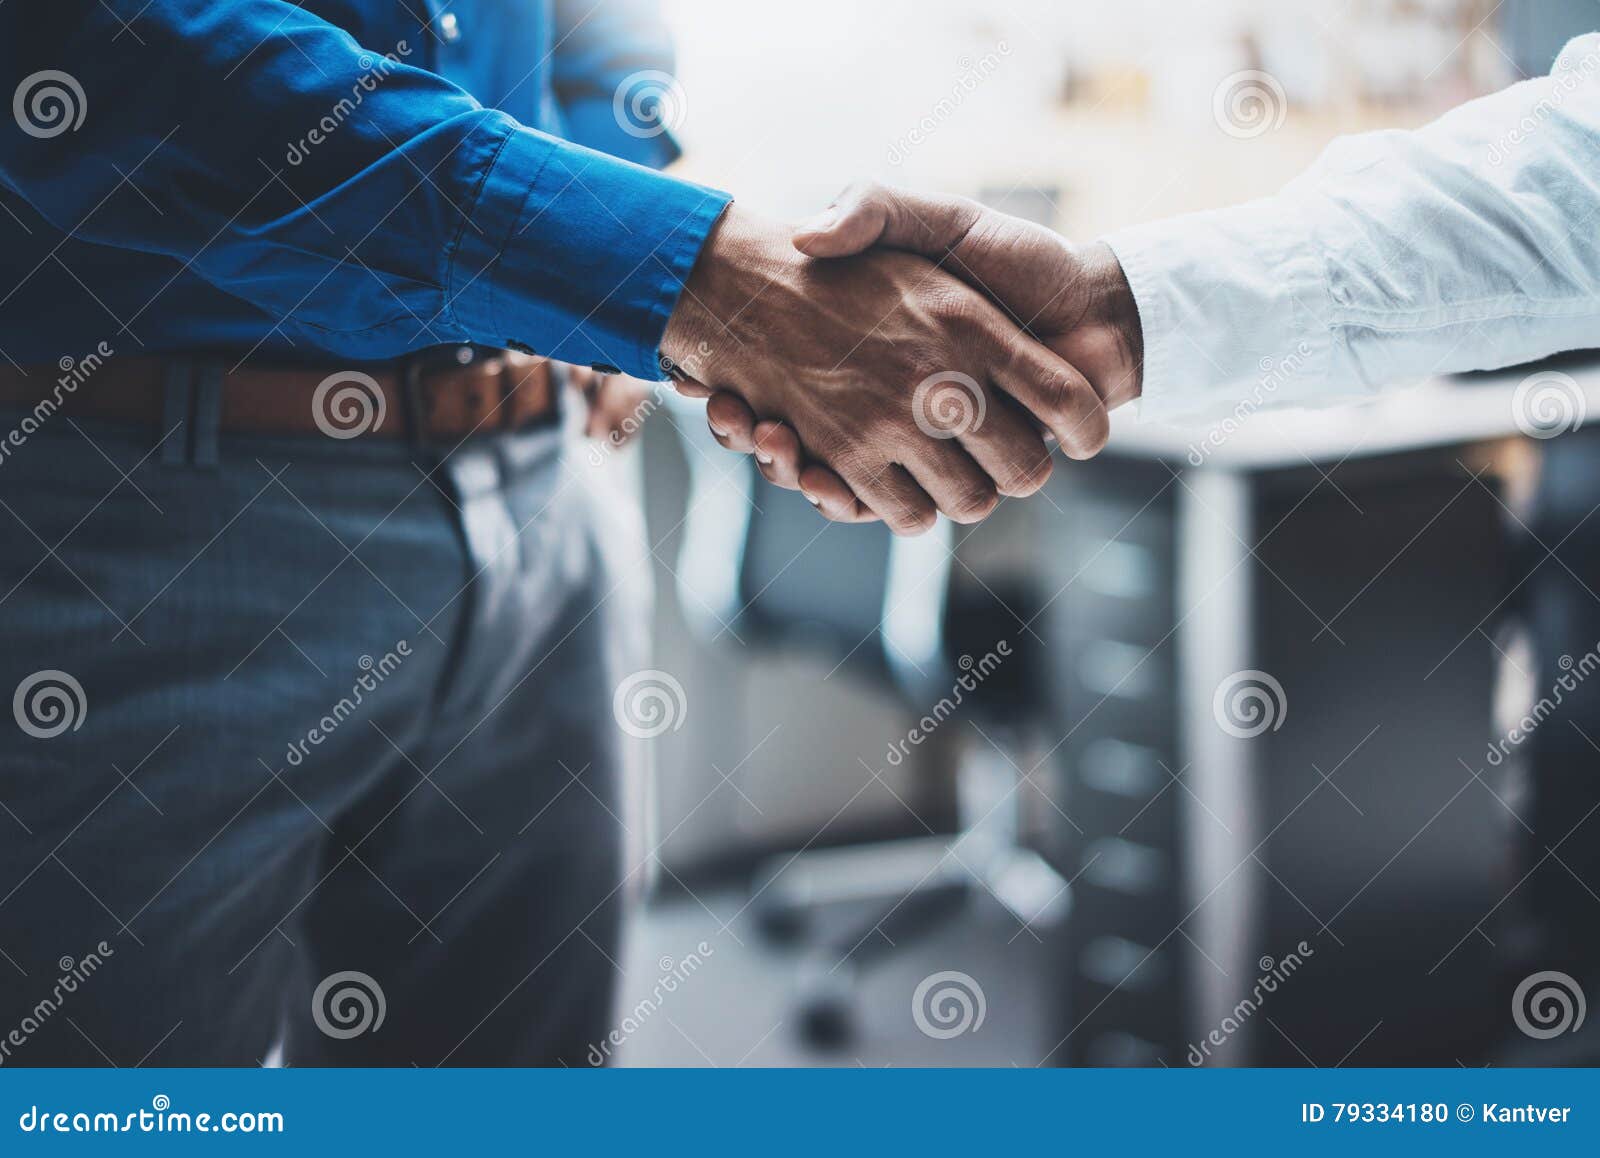 business partnership handshake concept.image of two businessmans handshaking process.successful deal after great